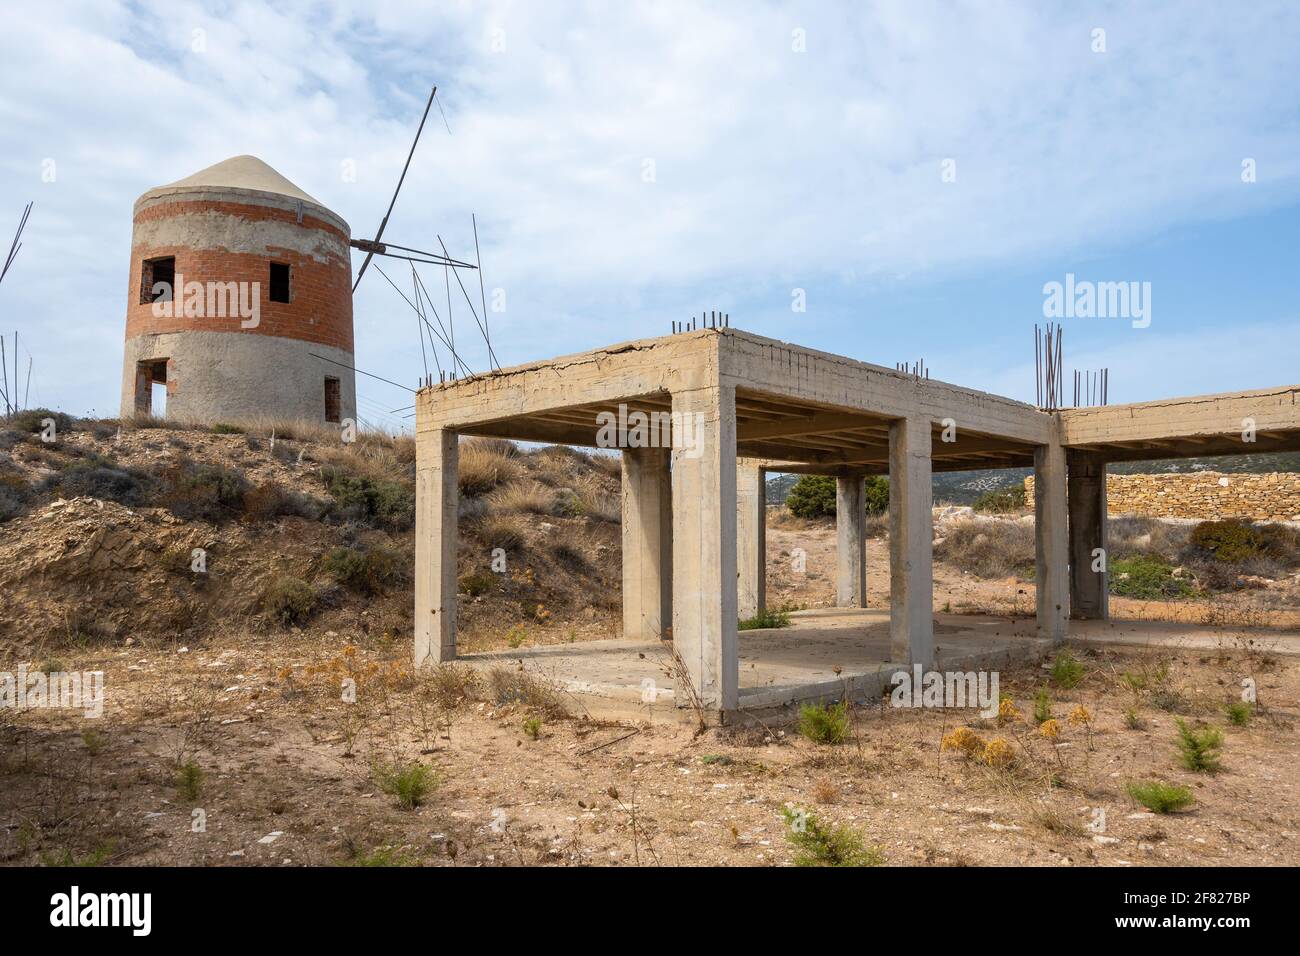 Greek holiday building under construction in Antiparos Island. Cyclades, Greece Stock Photo